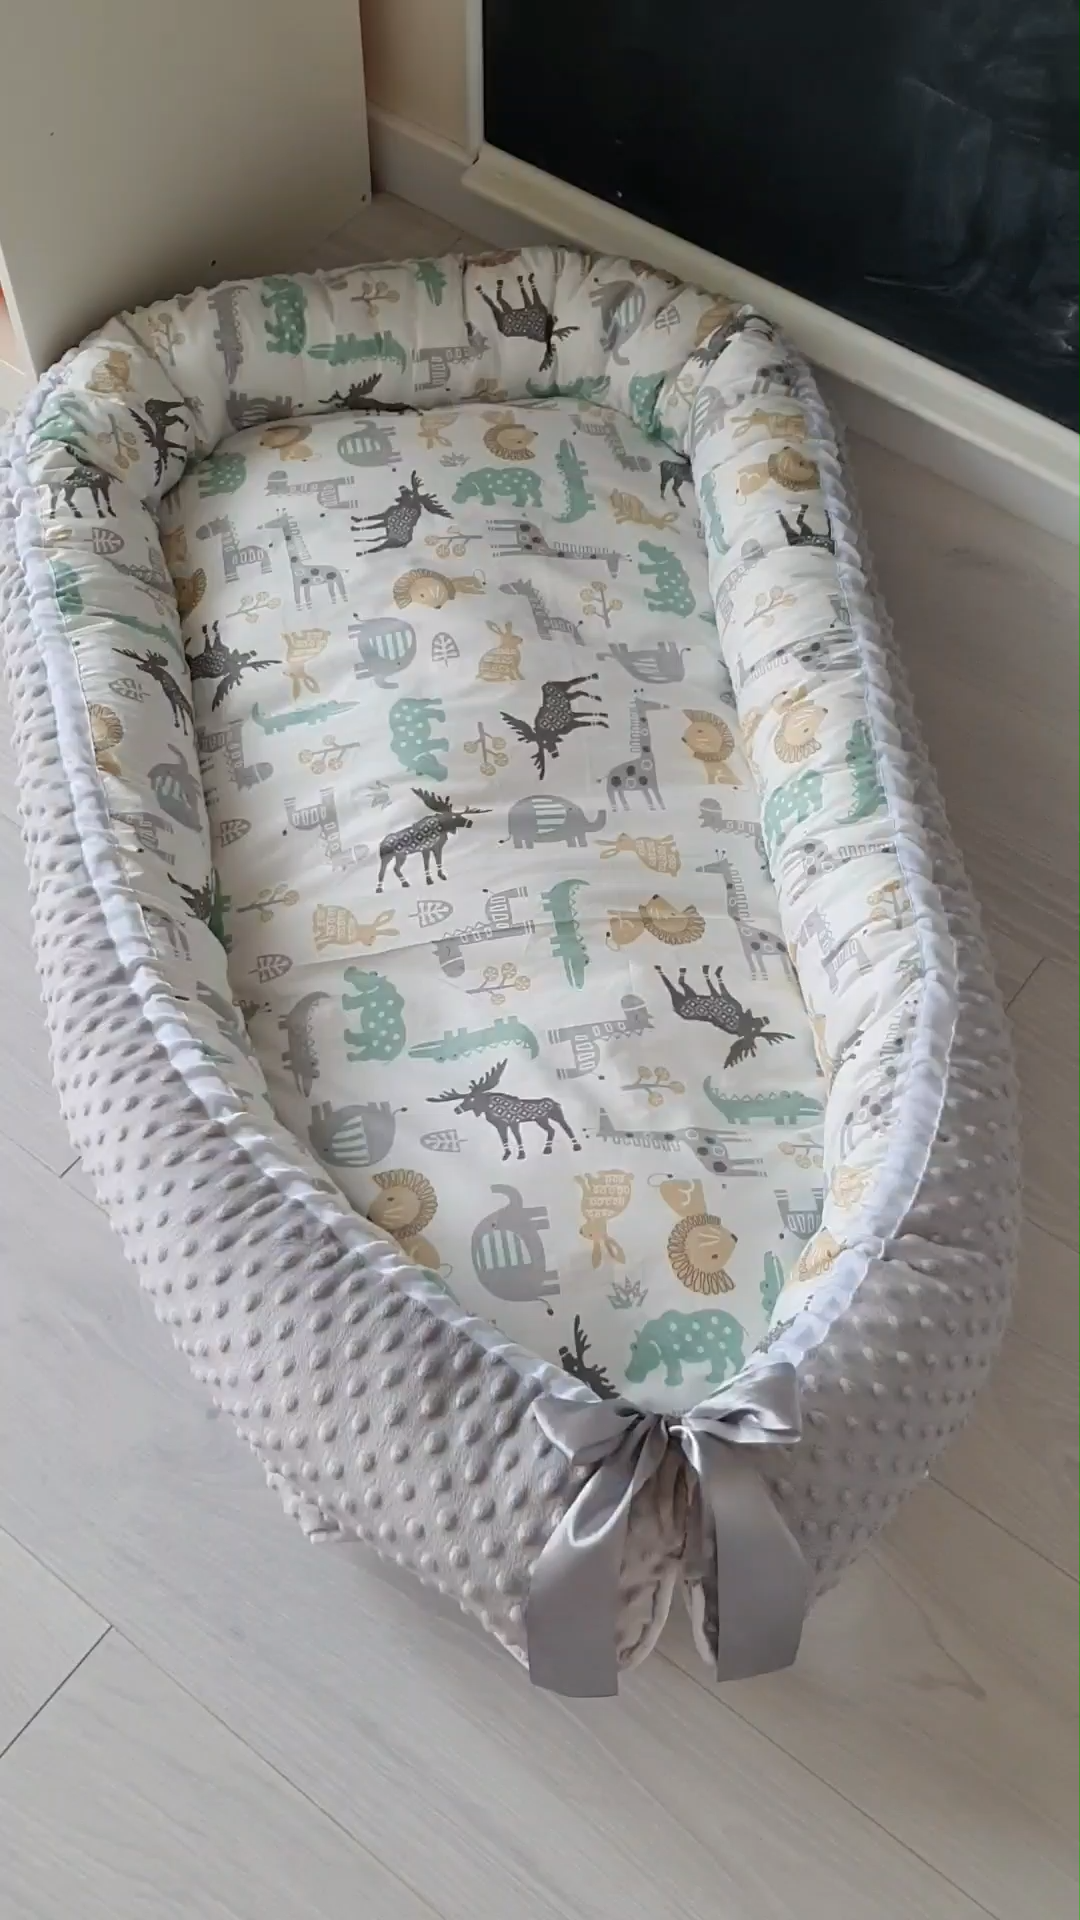 Baby nest Baby cocoon Baby nest bed with zoo animals Woodland nursery Newborn lounger Cosleeper - Baby nest Baby cocoon Baby nest bed with zoo animals Woodland nursery Newborn lounger Cosleeper -   9 diy Baby bassinet ideas